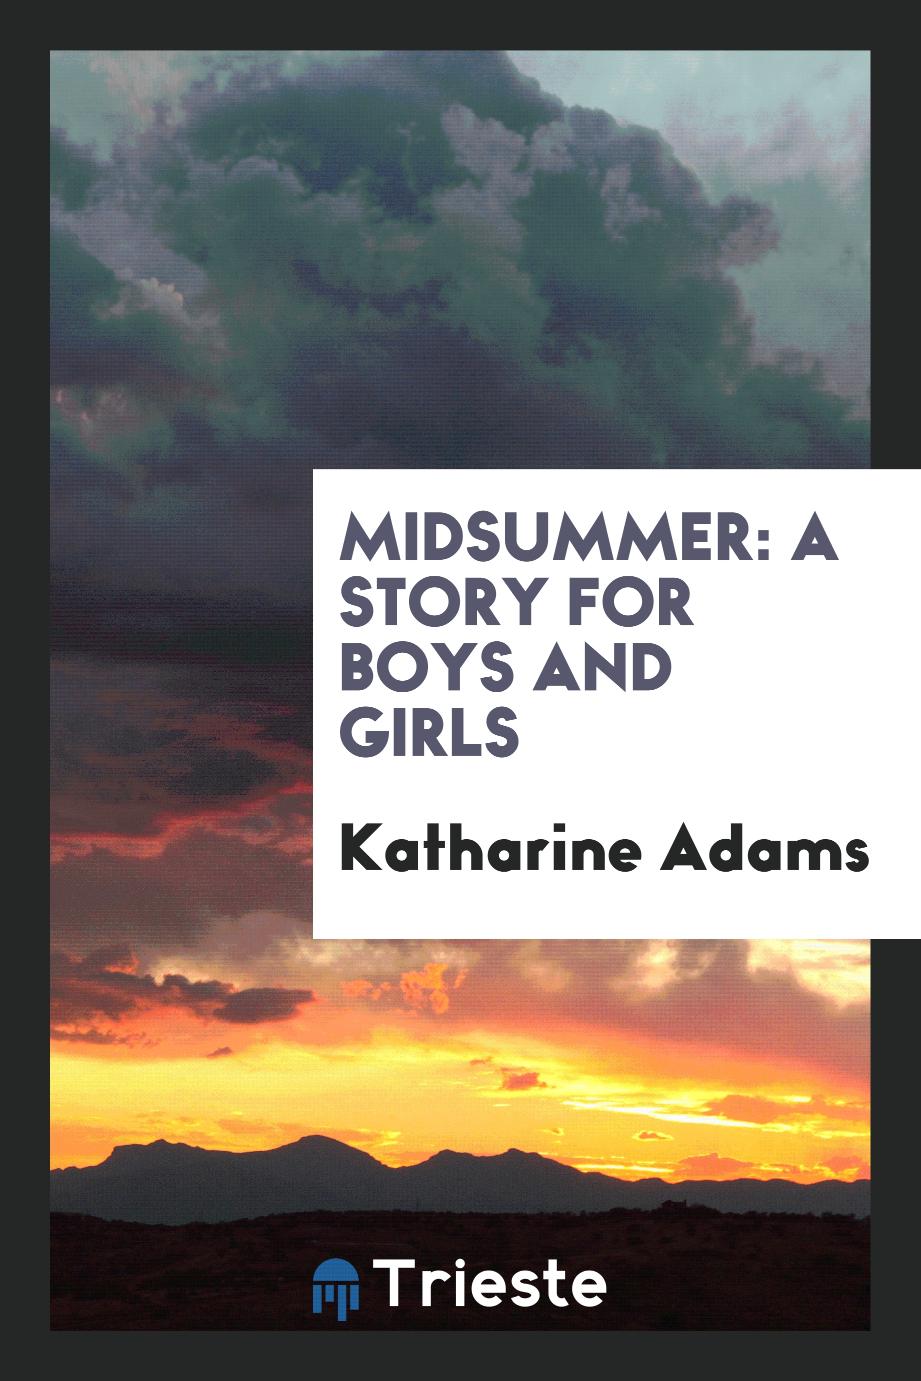 Midsummer: a story for boys and girls